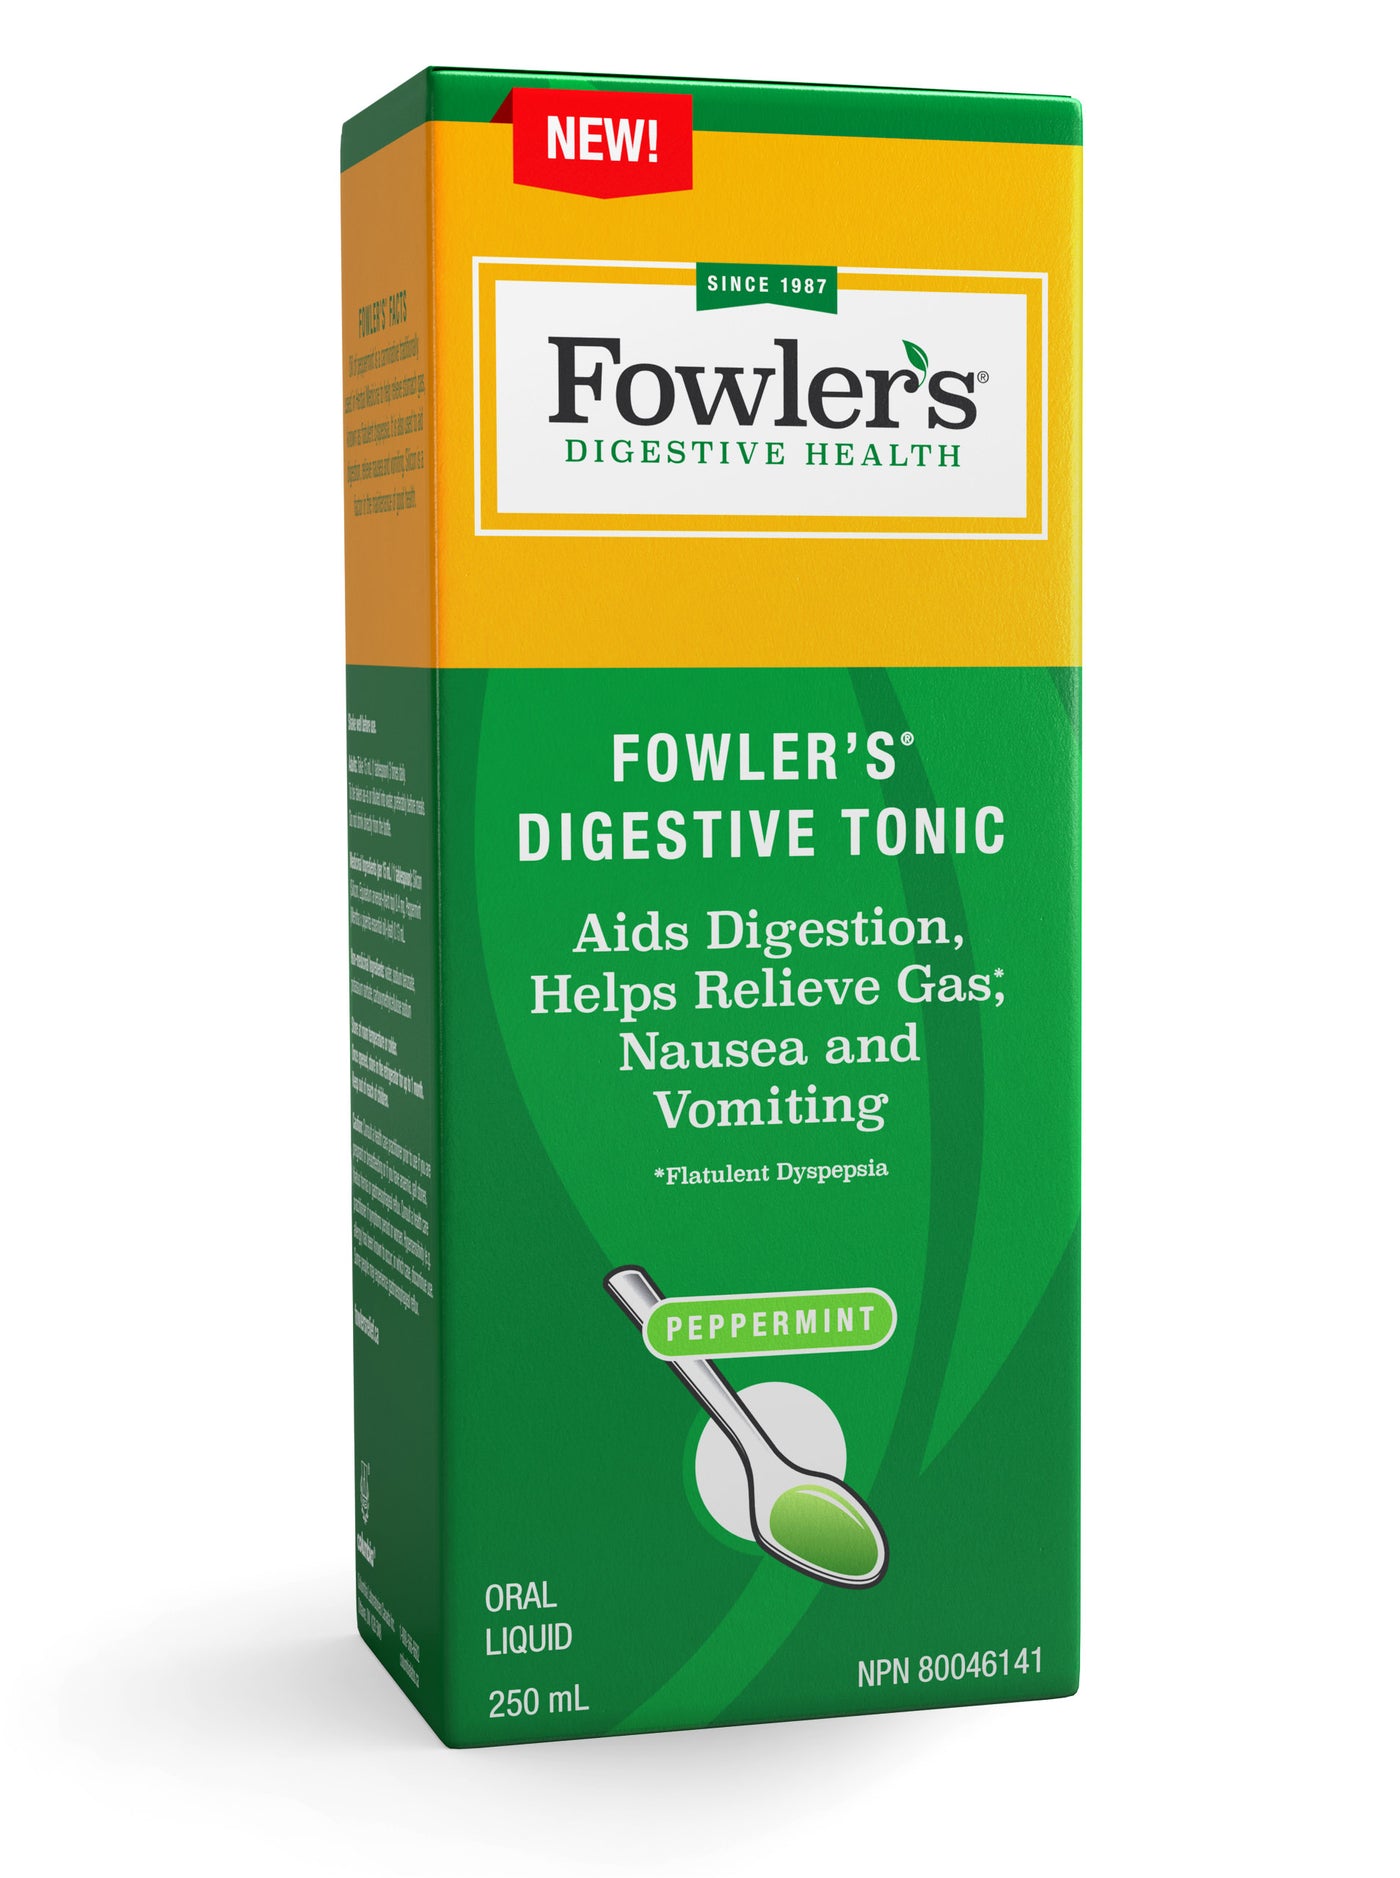 Fowler's Digestive Tonic – Aids Digestion, Helps Relieve Gas, Nausea and Vomiting